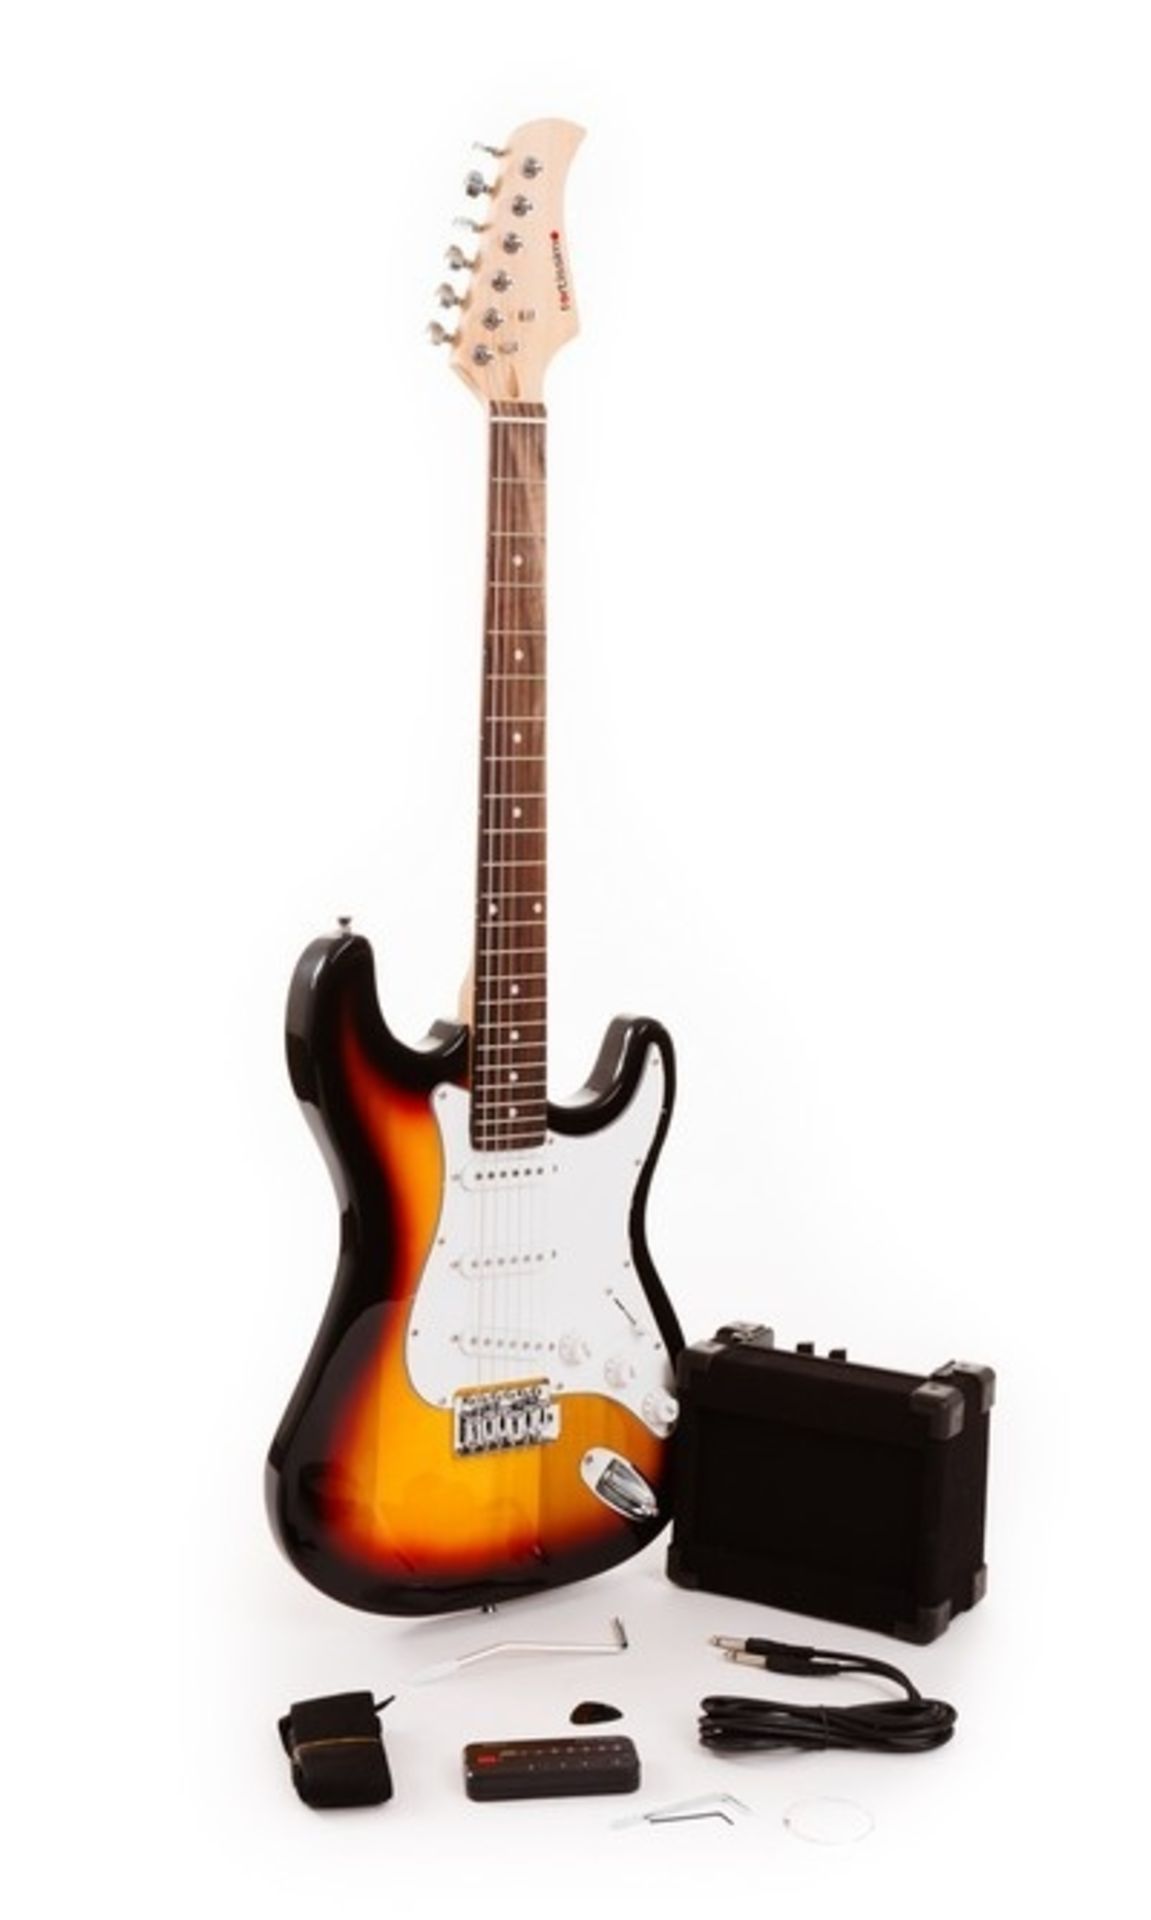 ONE BOXED BRAND NEW ELECTRIC GUITAR IN SUNBURST WITH ACCESSORIES, 240V WITH 10W AMPLIFIER, BAG, - Image 2 of 2